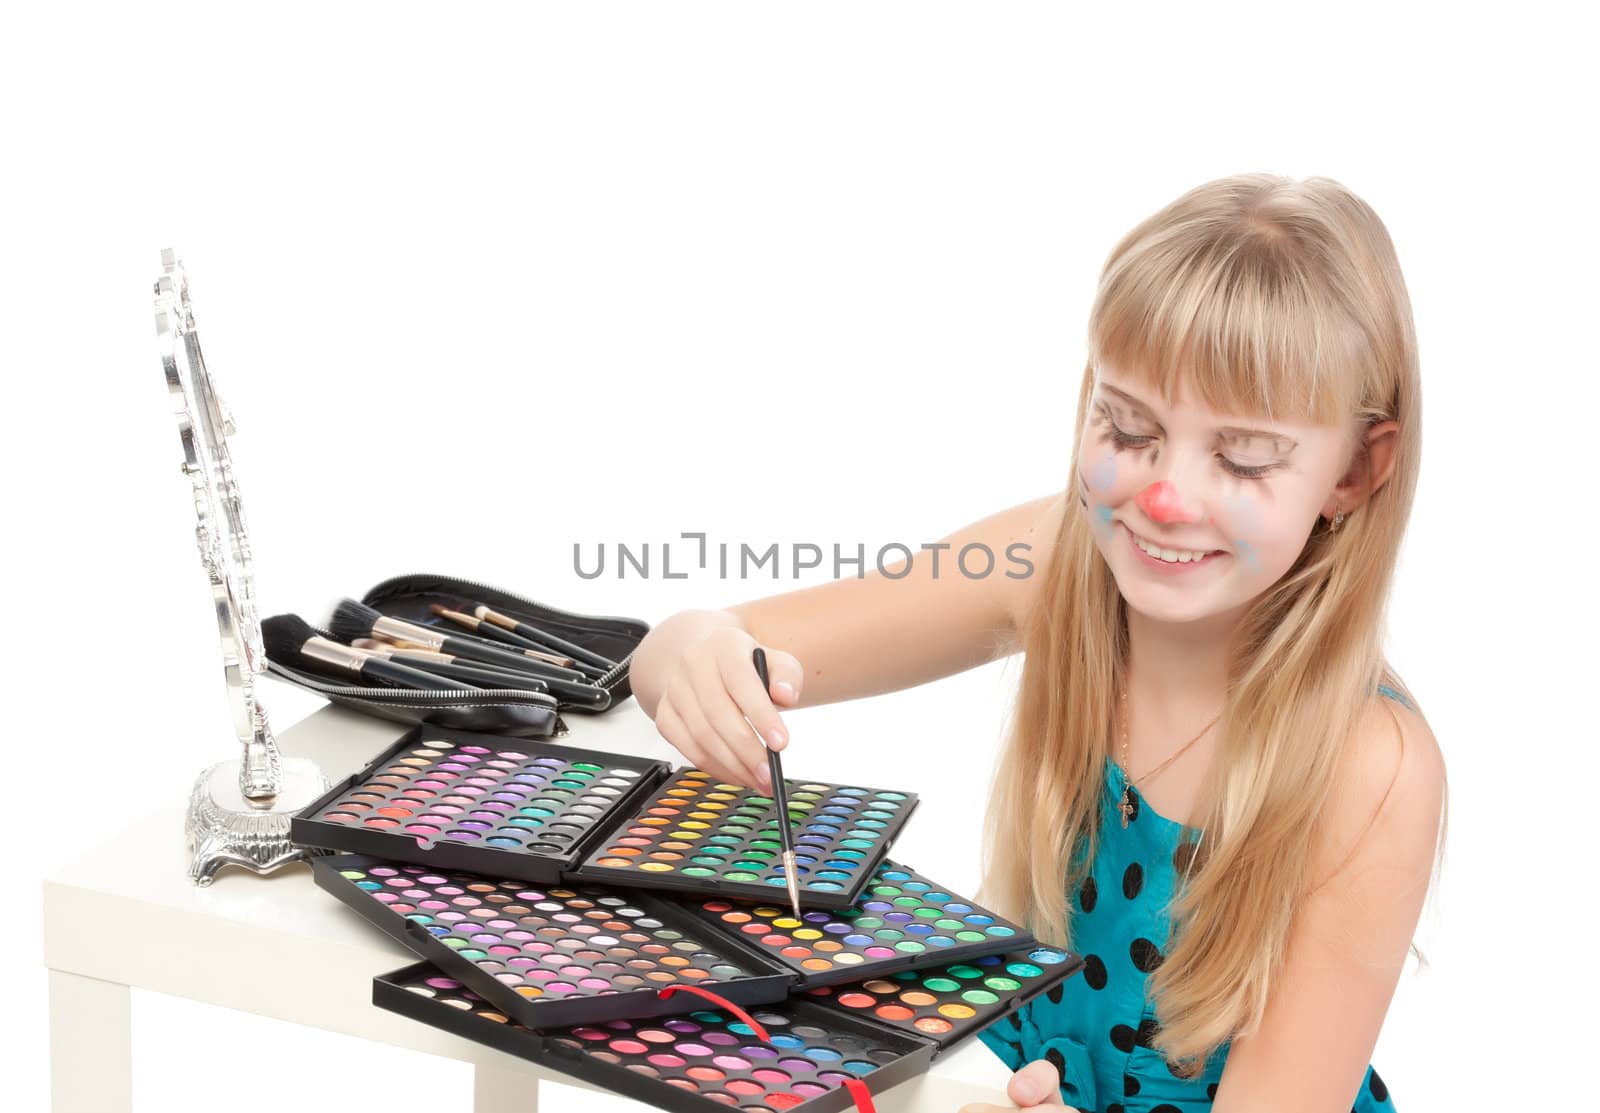 Little girl paints his face makeup, on white background